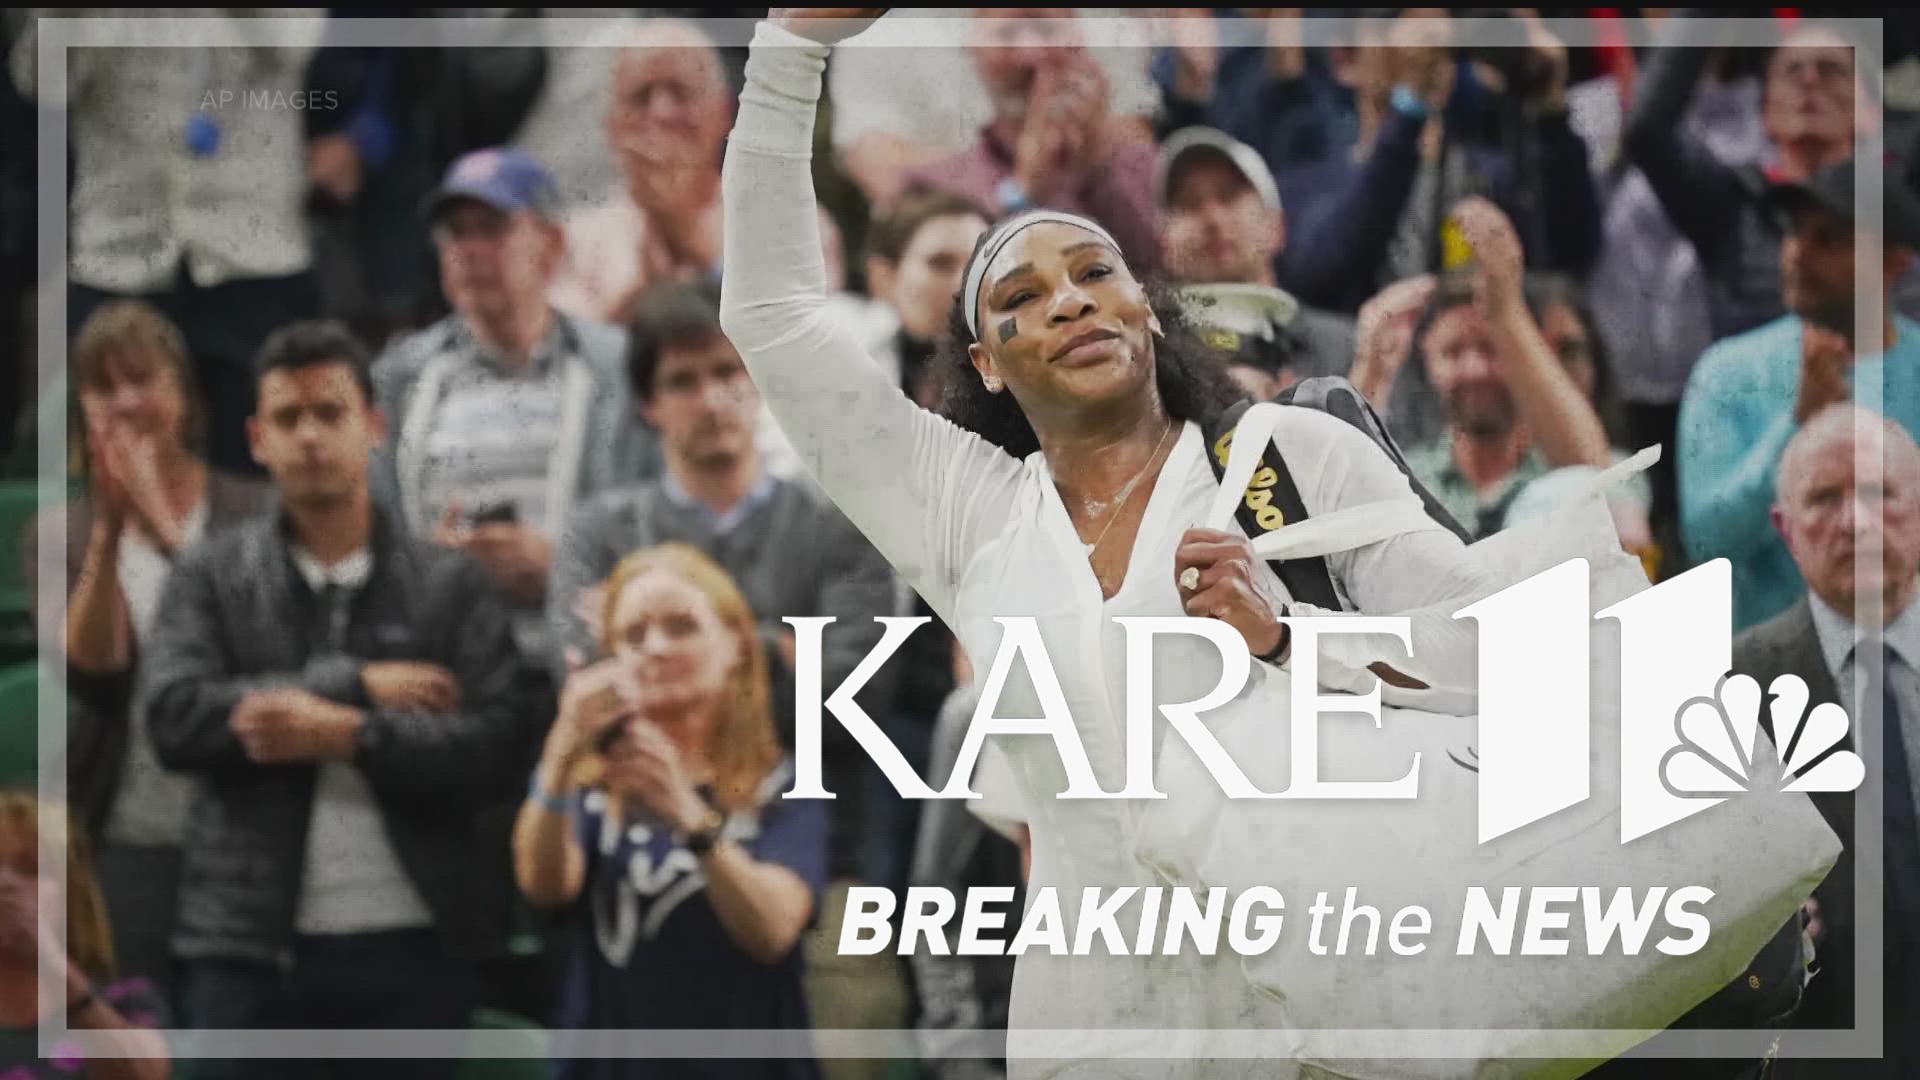 The 23-time Grand Slam winner says she wants to focus on growing her family and her business.